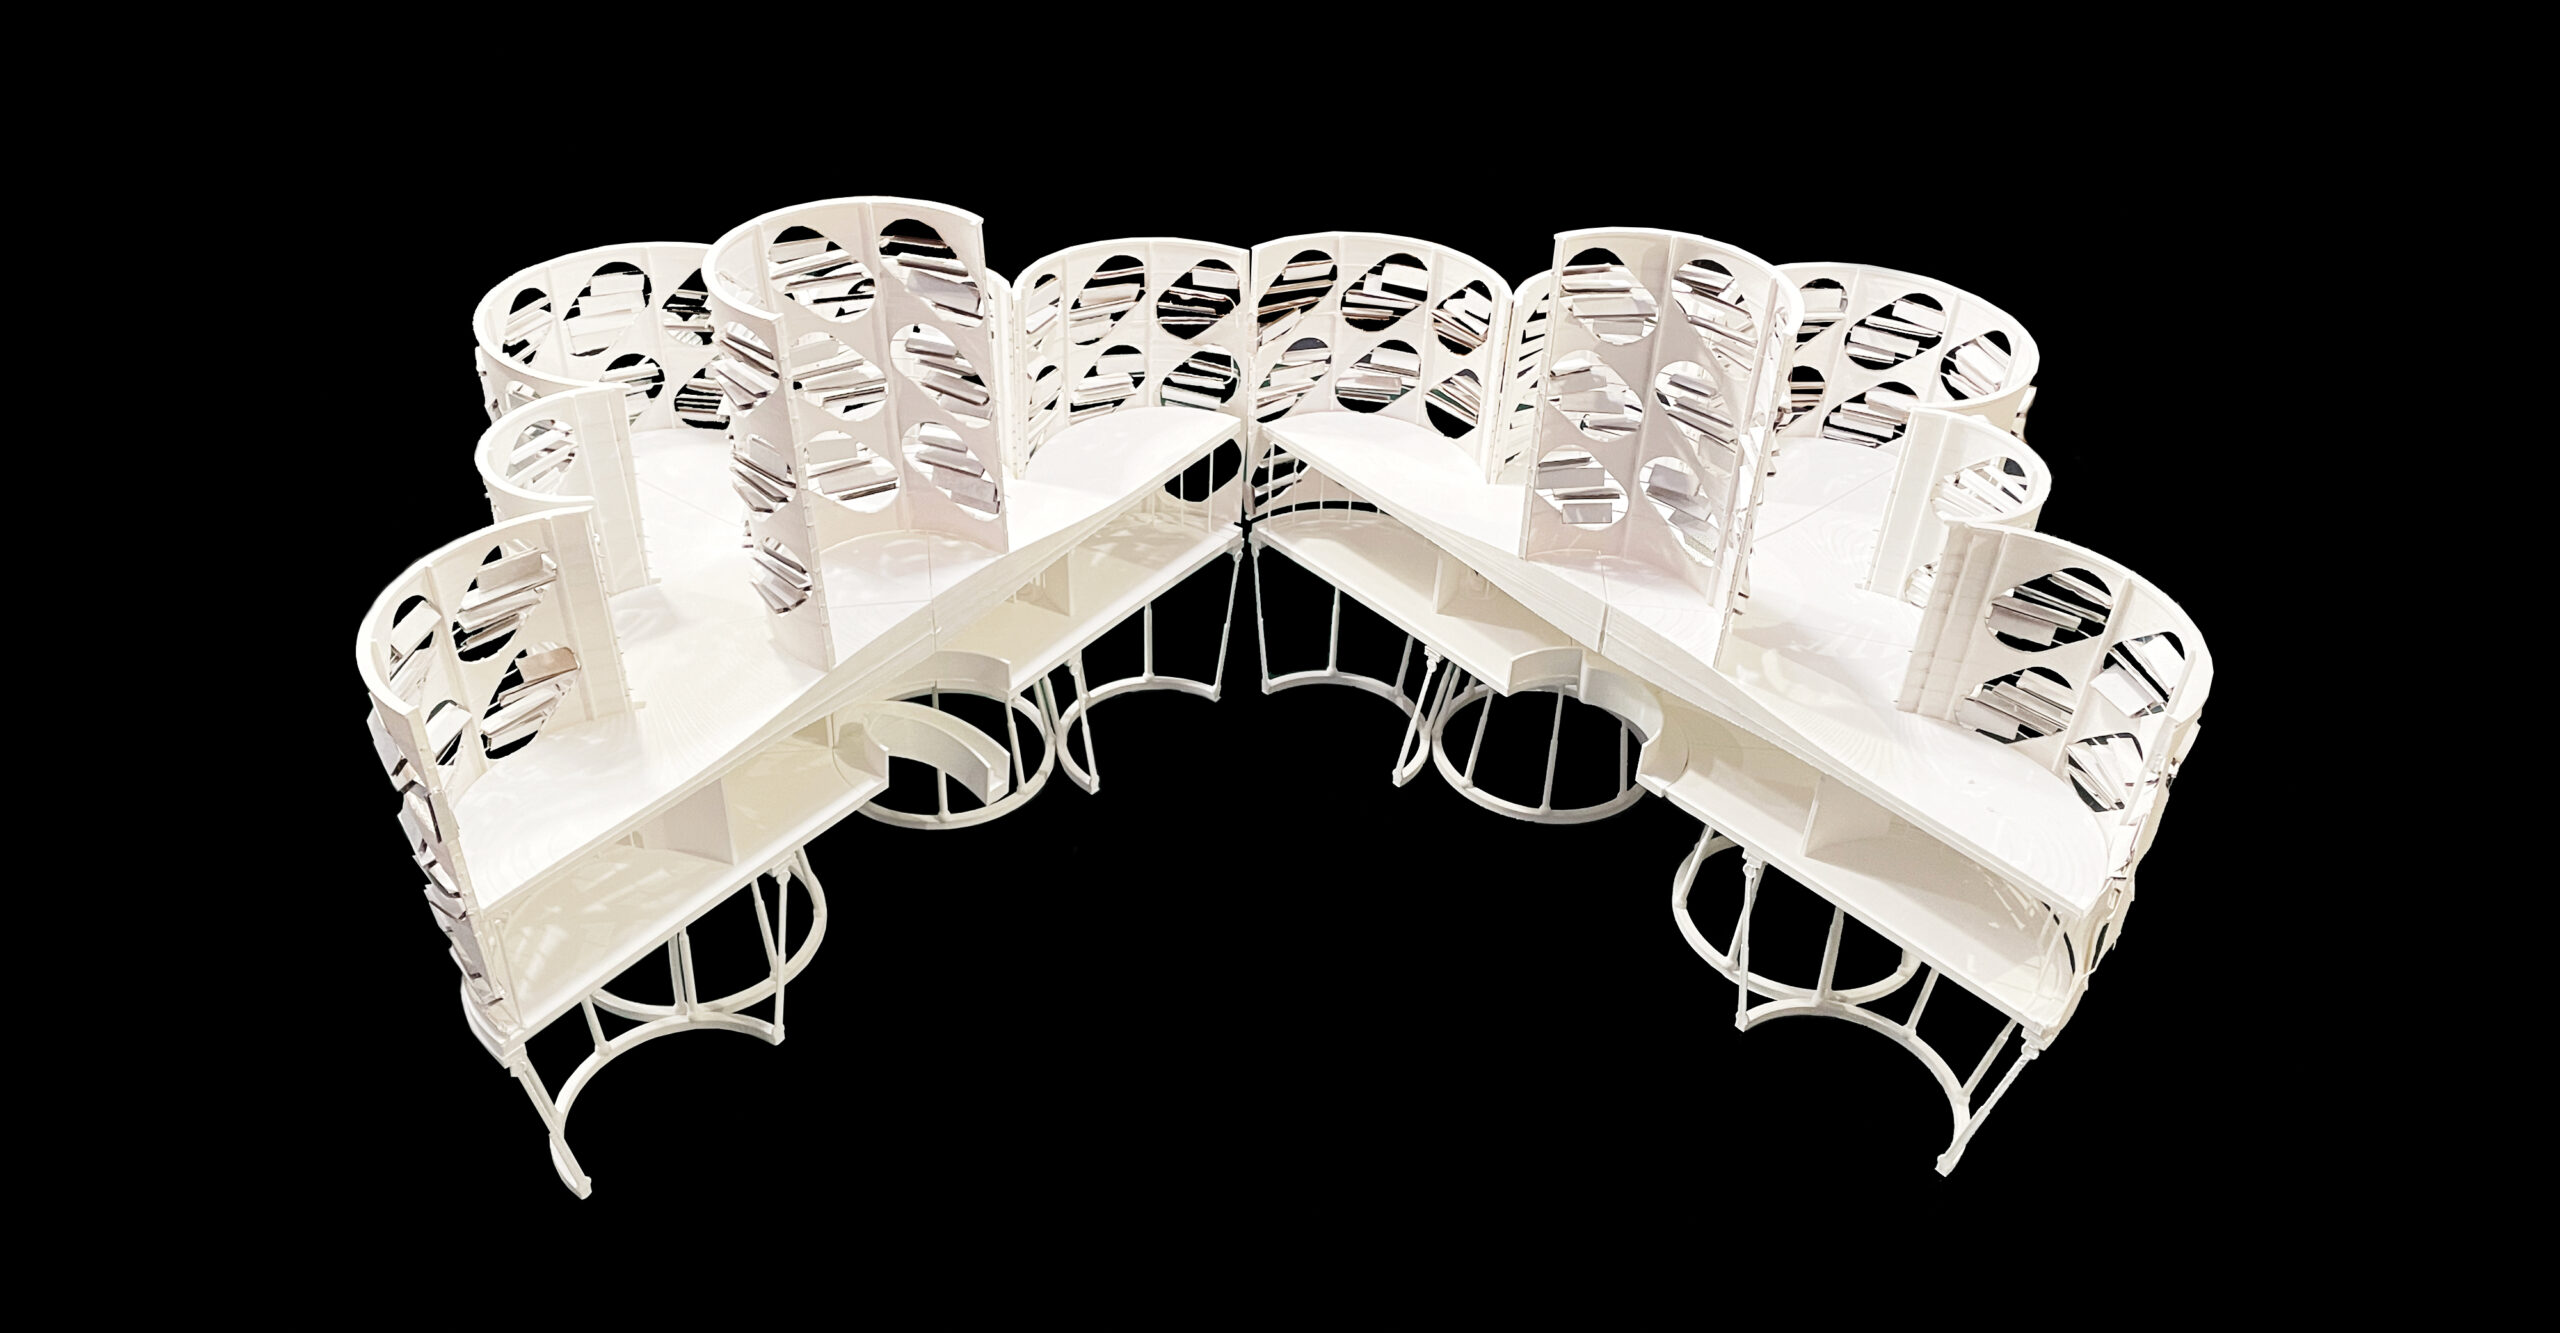 White architectural model with curved walls embedded with wind turbines opened to reveal the interior levels and rooms